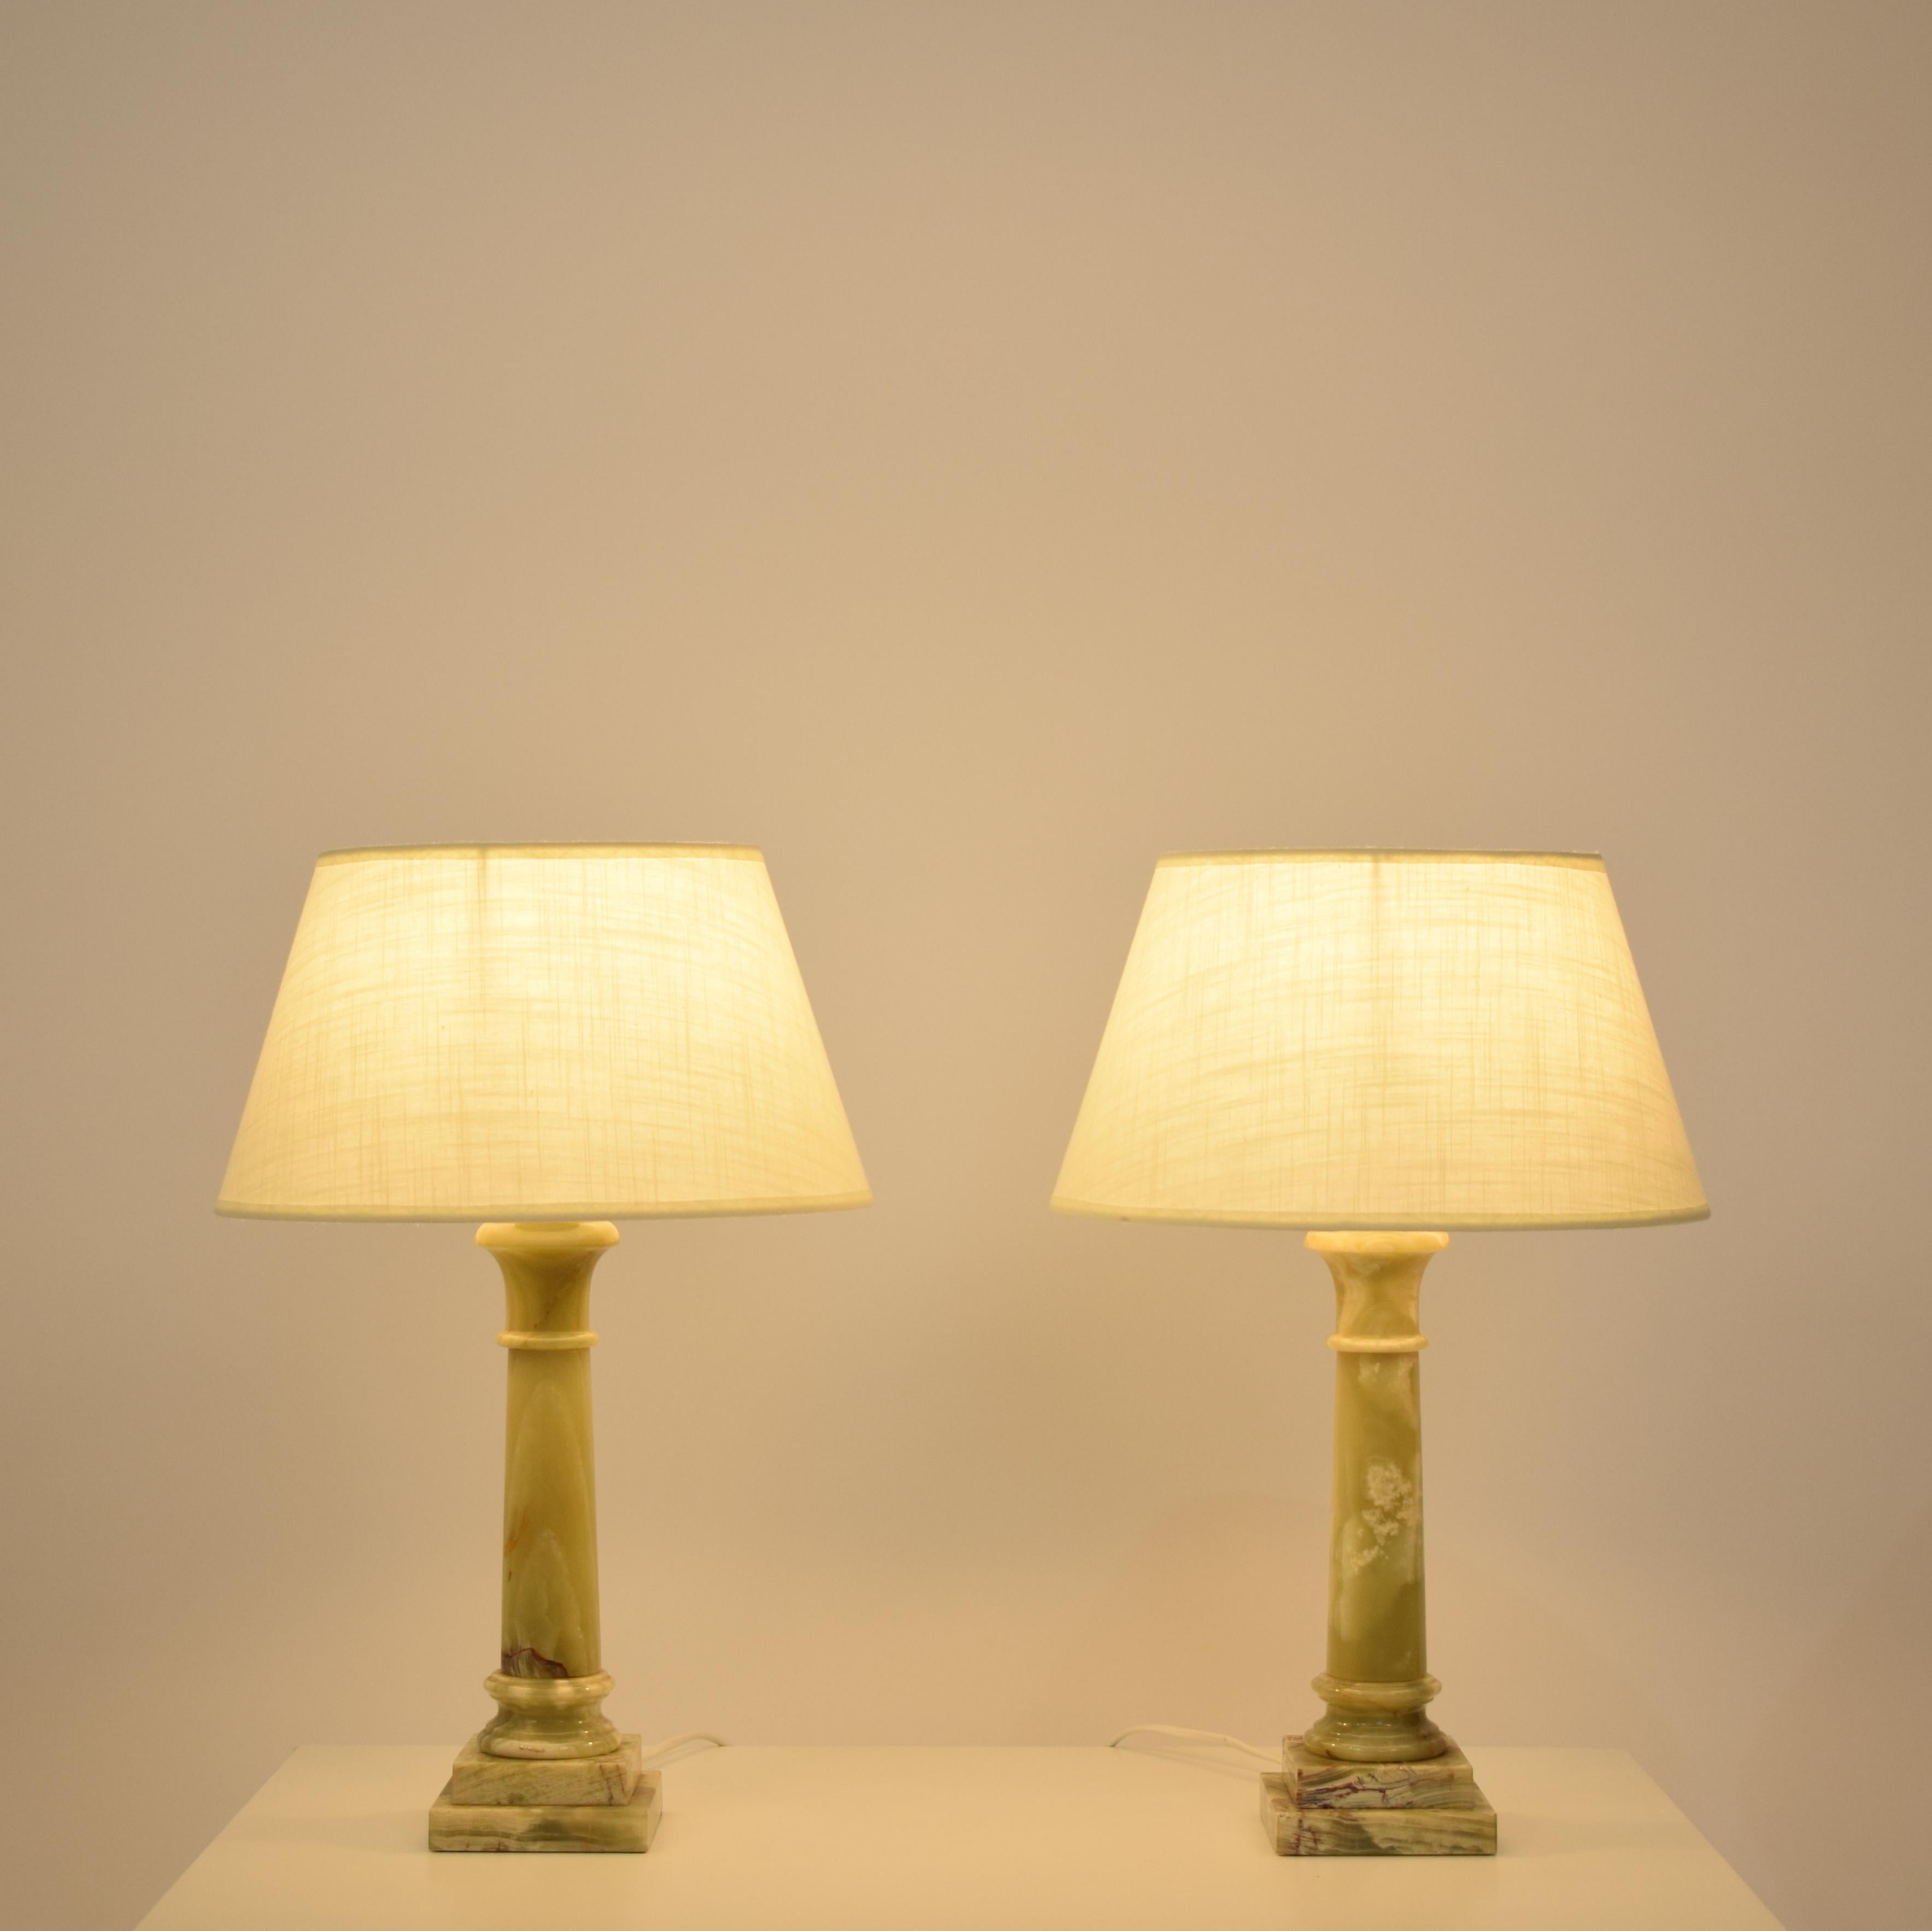 This pair of midcentury green alabaster table lamps where made in the 1970s.
They come with two Lampe shades.
A beautiful pair for every kind of interior like vintage, midcentury, antique or modern.
With the shades the are each 45cm high and 30cm